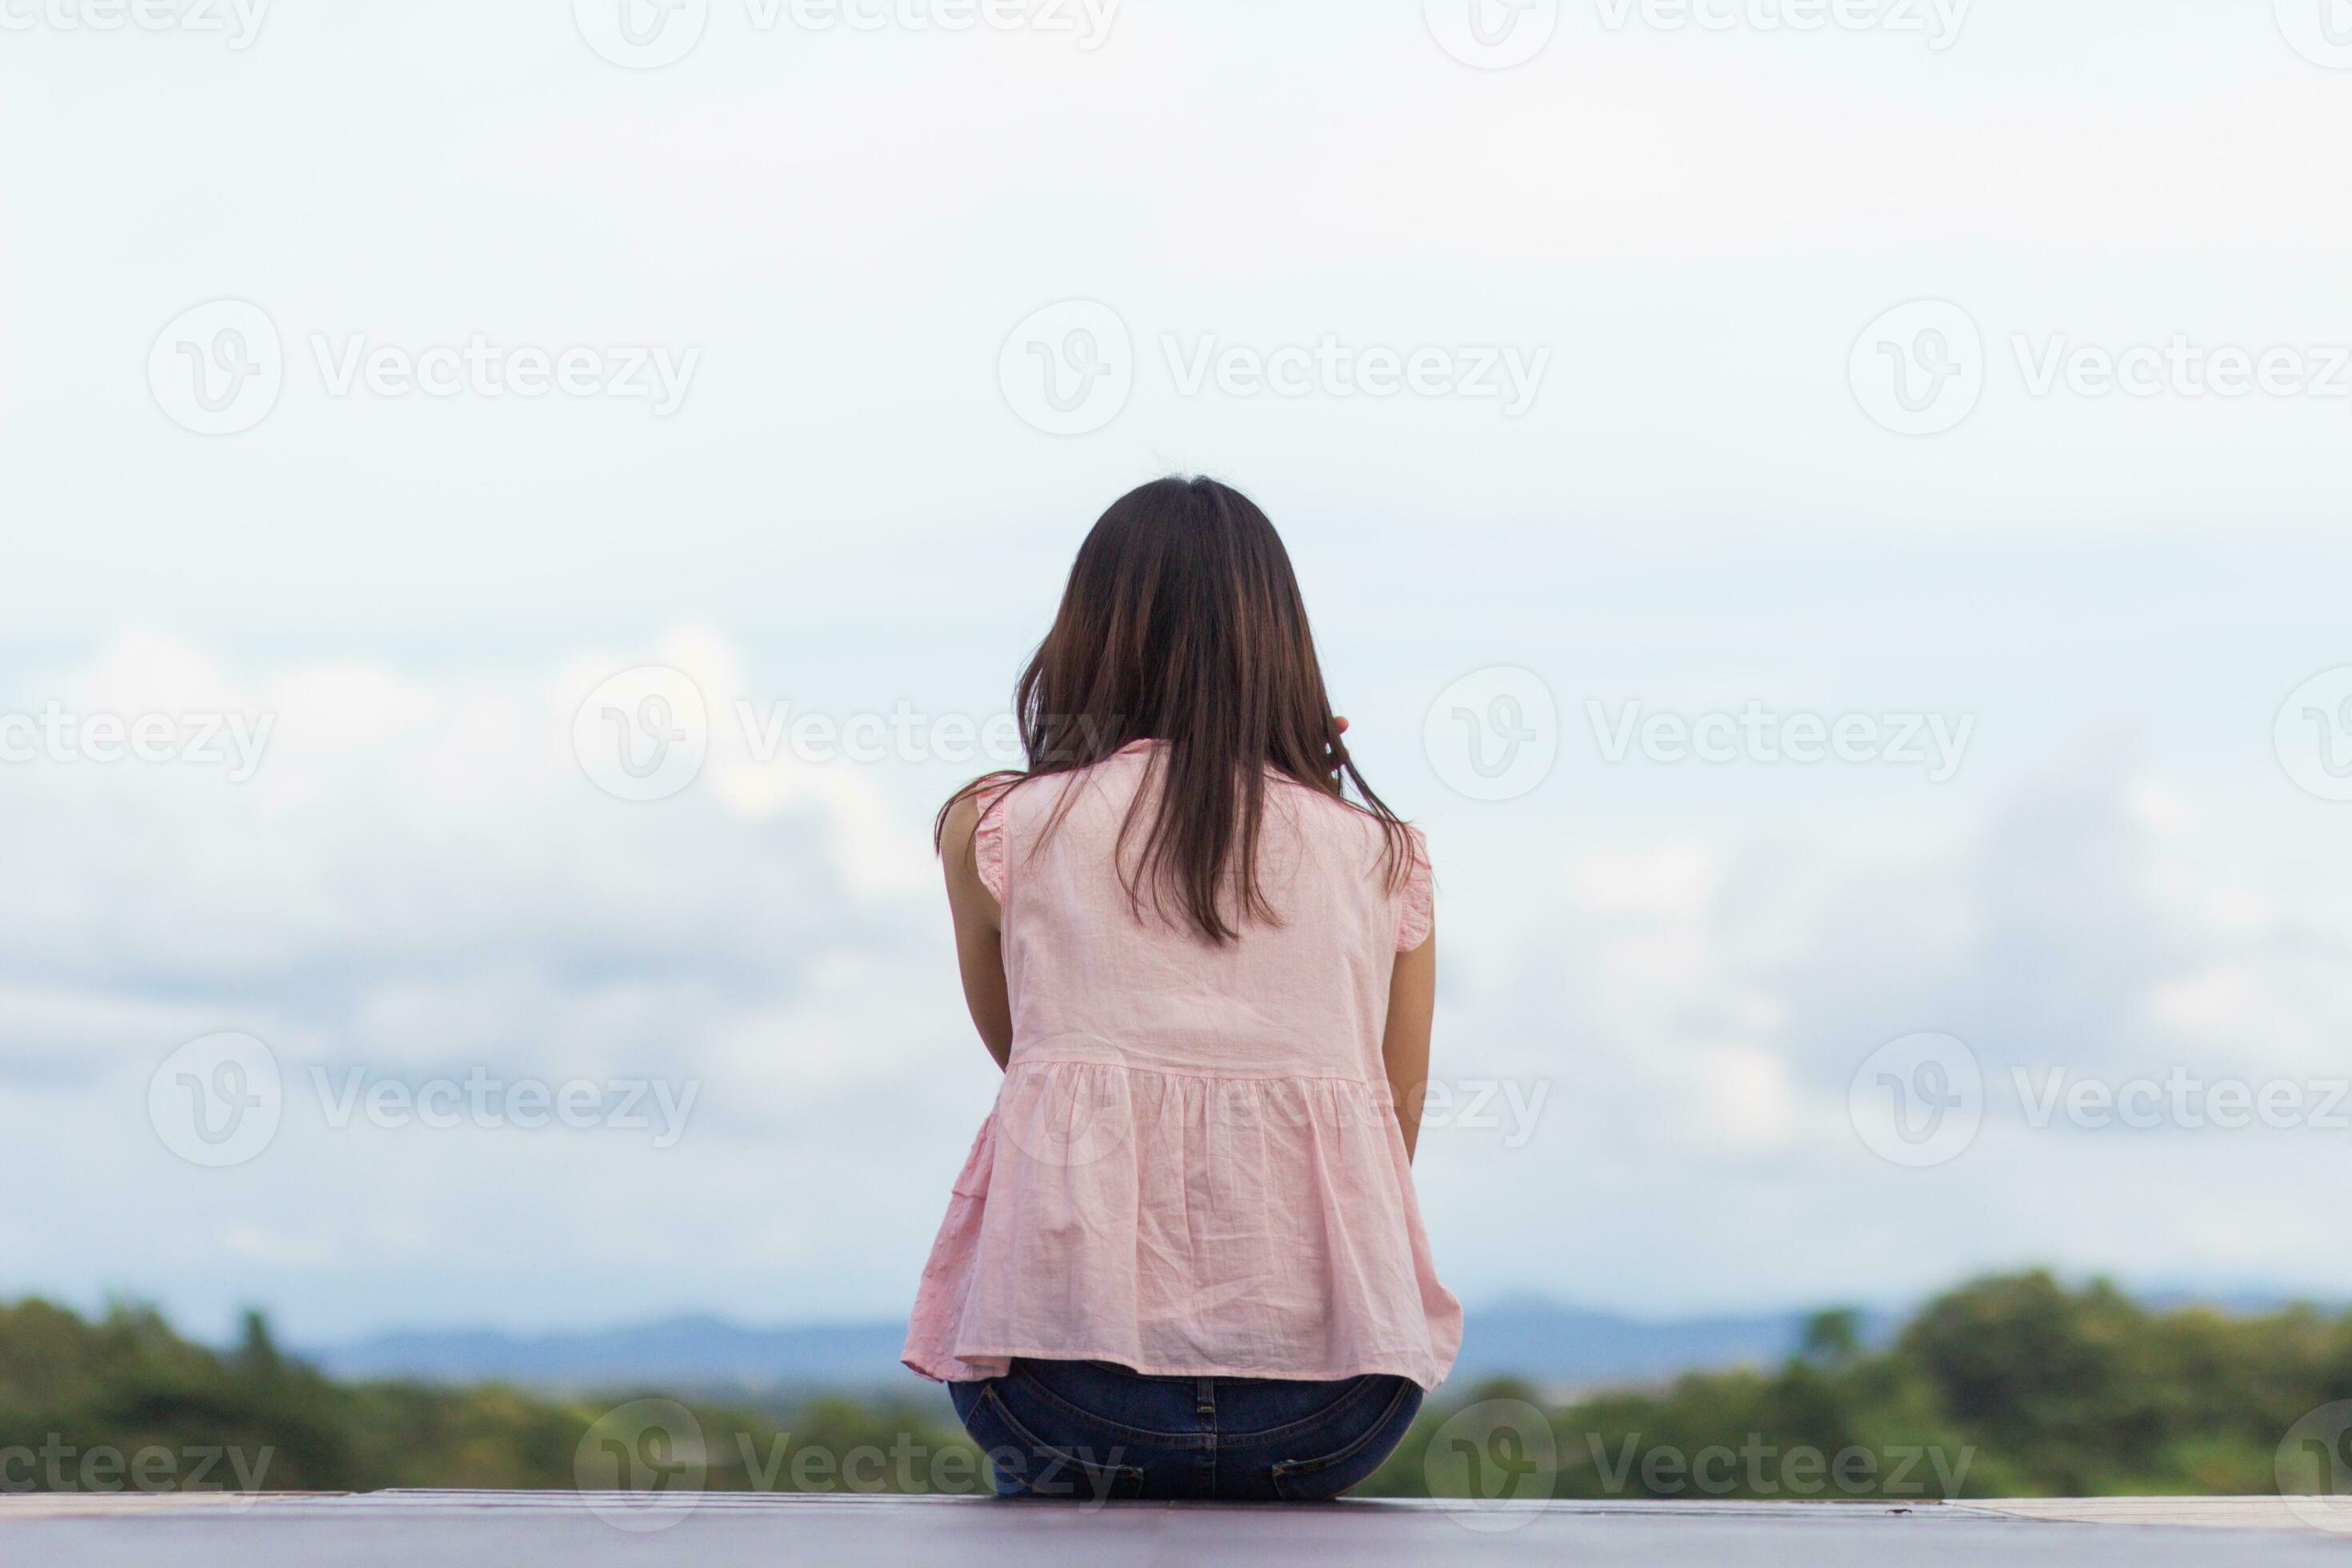 https://static.vecteezy.com/system/resources/previews/030/195/500/large_2x/back-scene-of-woman-alone-with-feeling-lonely-and-depressed-on-blurred-background-of-beautiful-nature-scenery-concept-of-woman-who-had-to-be-alone-in-past-was-depressed-when-she-encountered-problems-photo.jpg